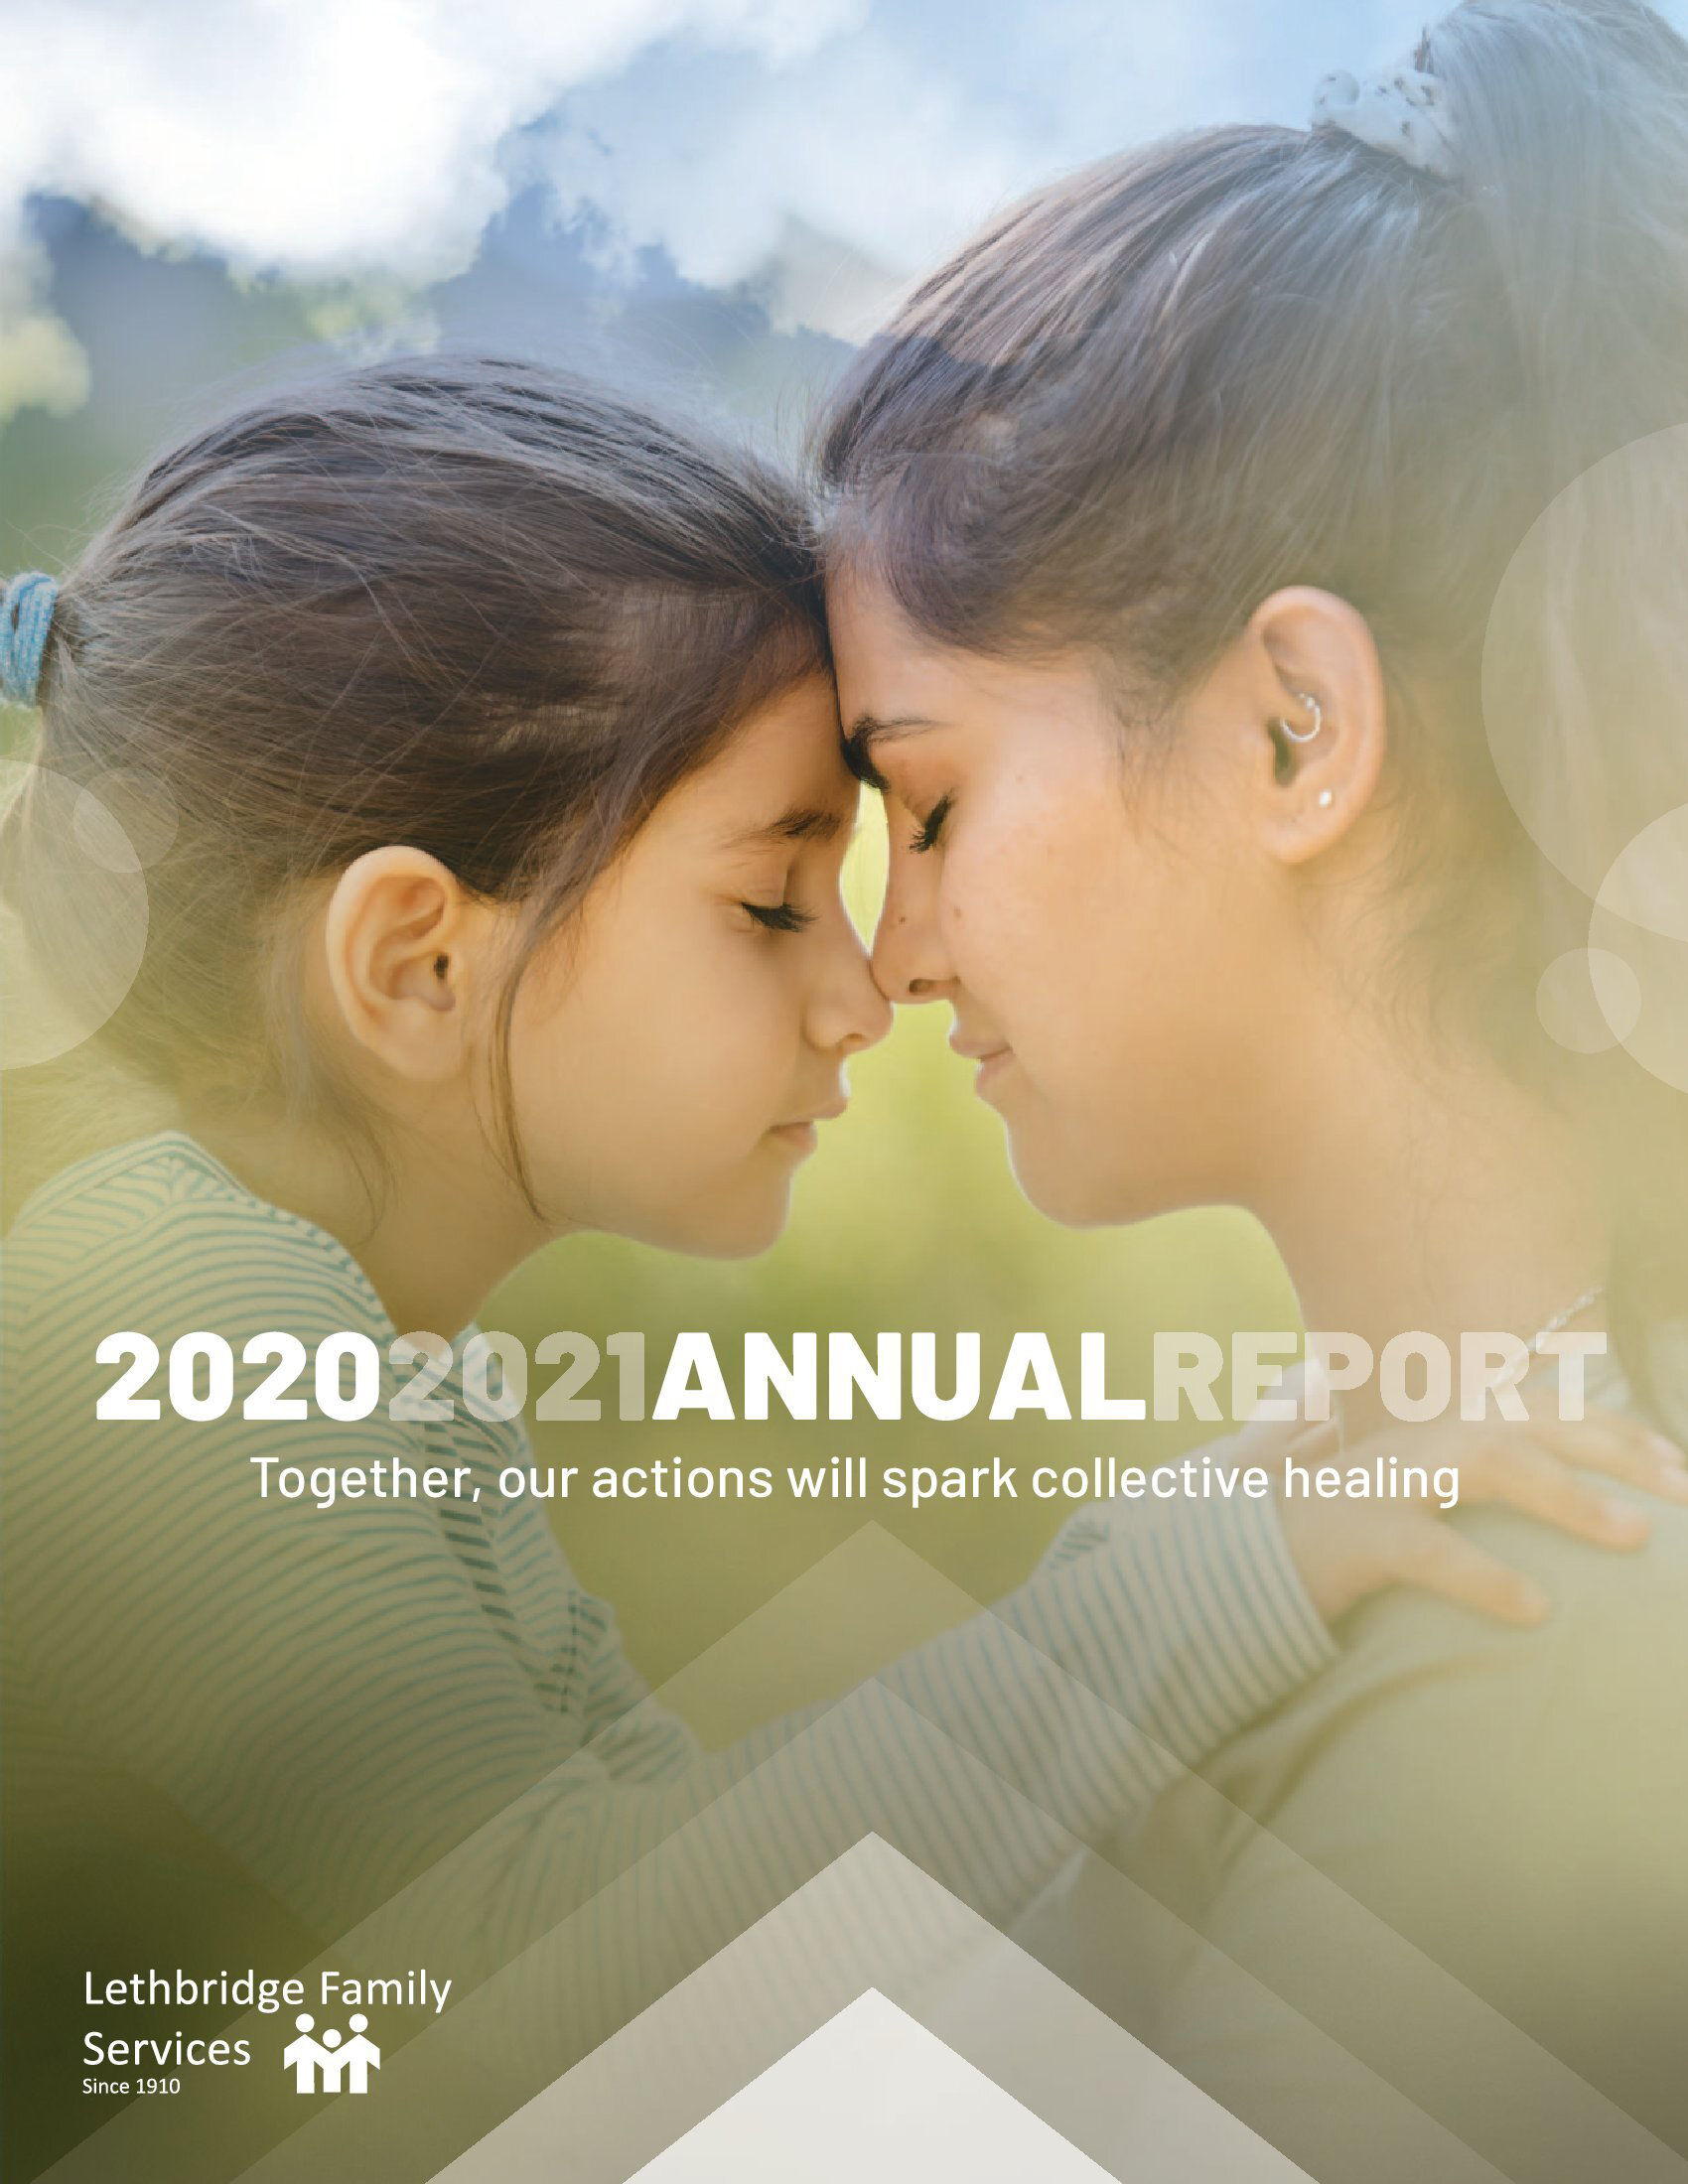 Lethbridge Family Services Annual Report 2020-2021